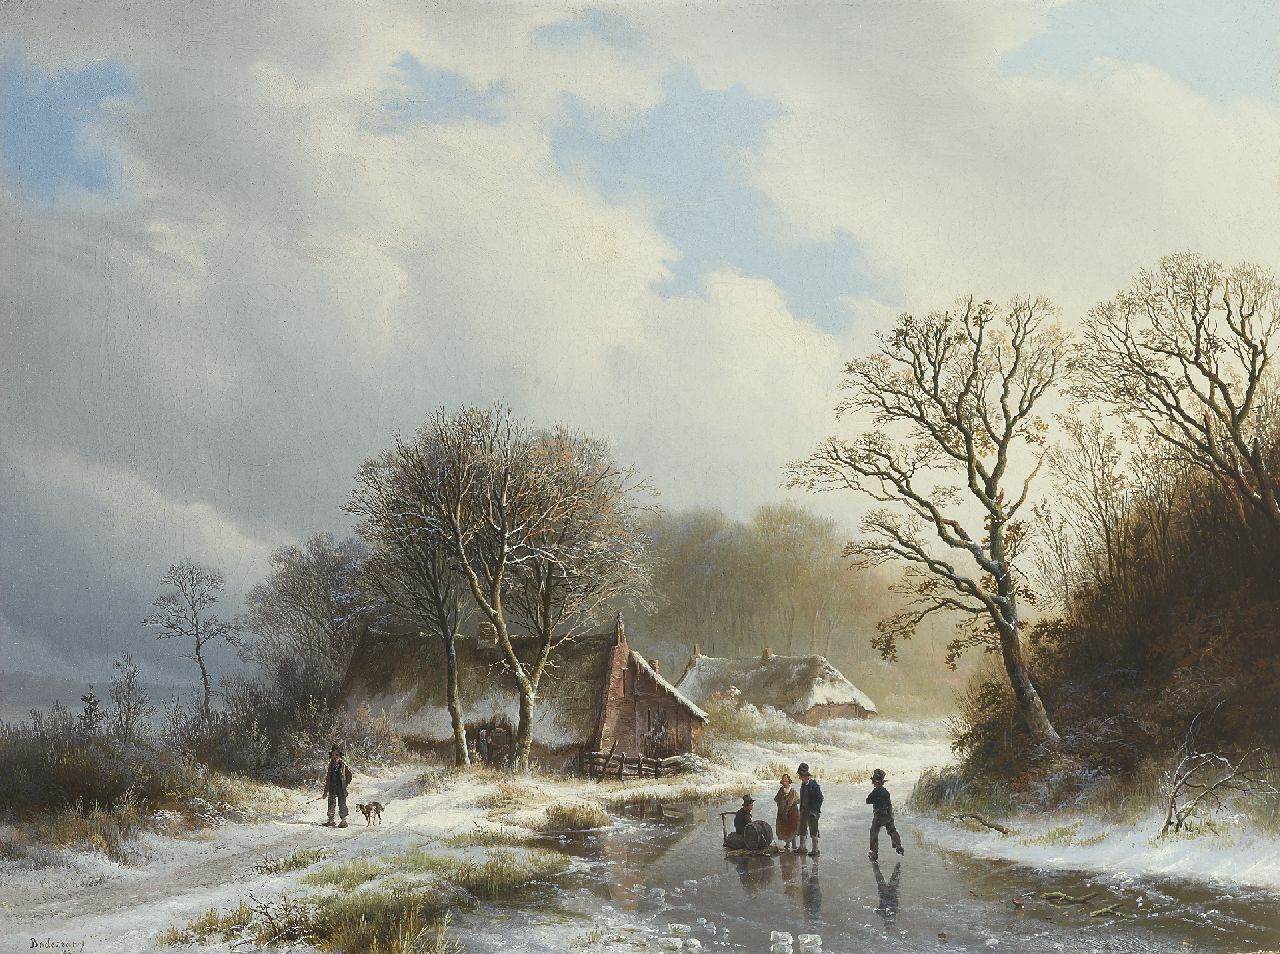 Bodeman W.  | Willem Bodeman, A winter landscape with skaters, oil on canvas 48.1 x 63.9 cm, signed l.l. and dated 1839